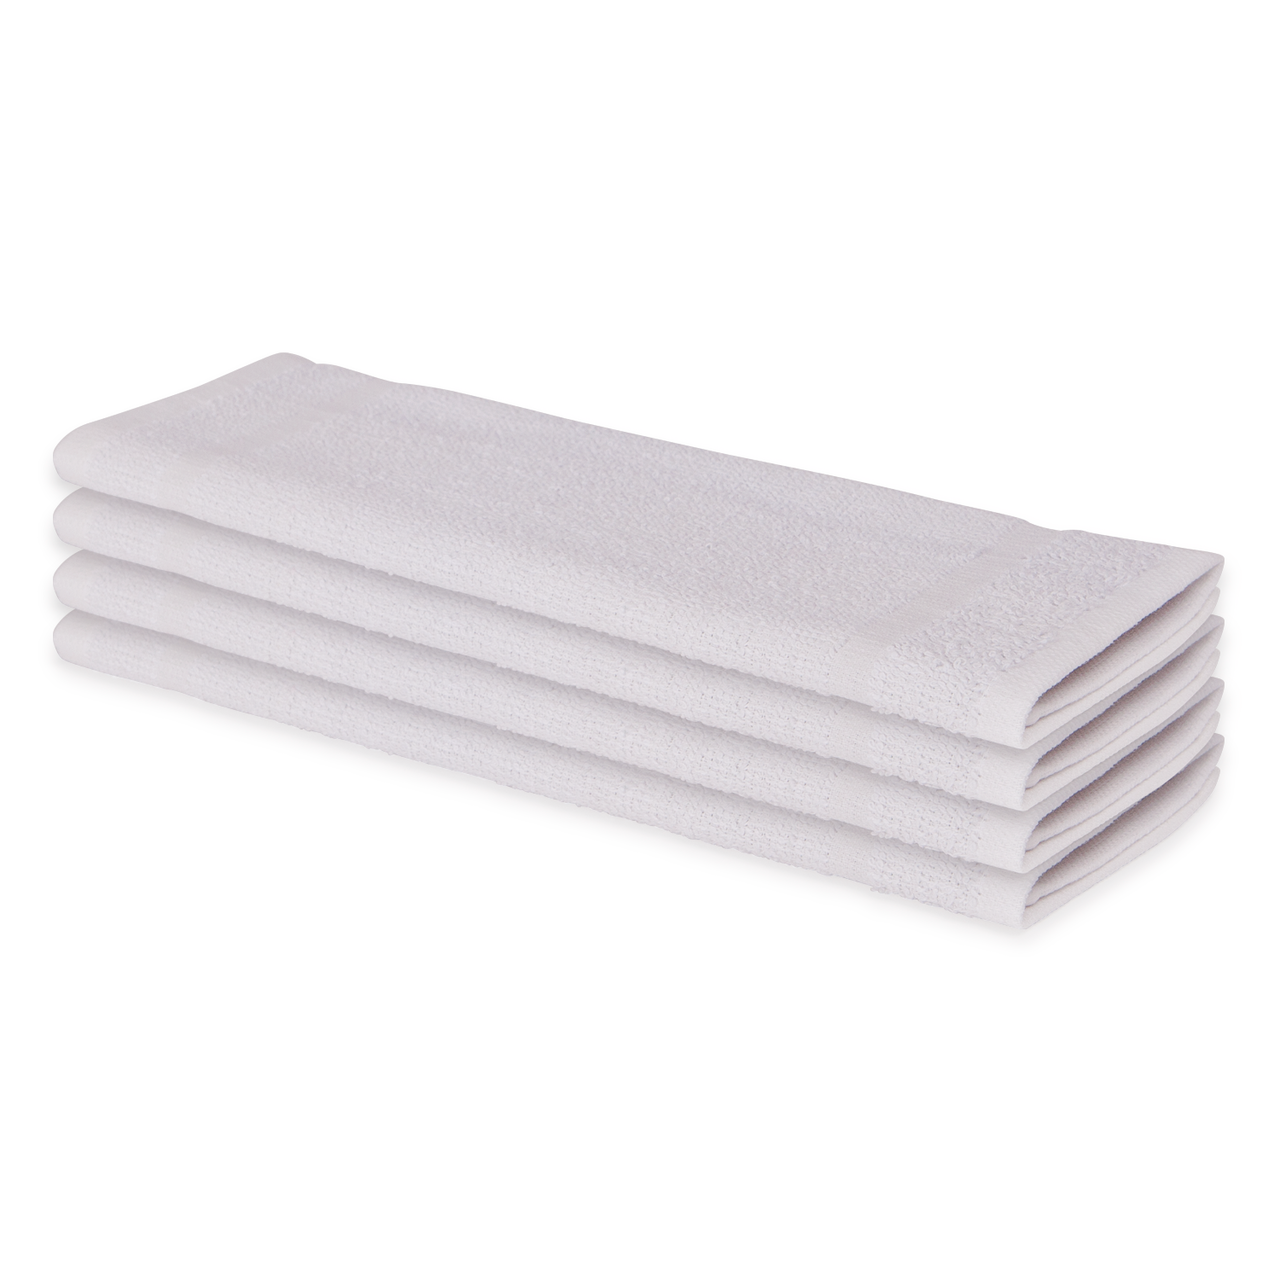 Cotton Huck Towels 12x12 New White